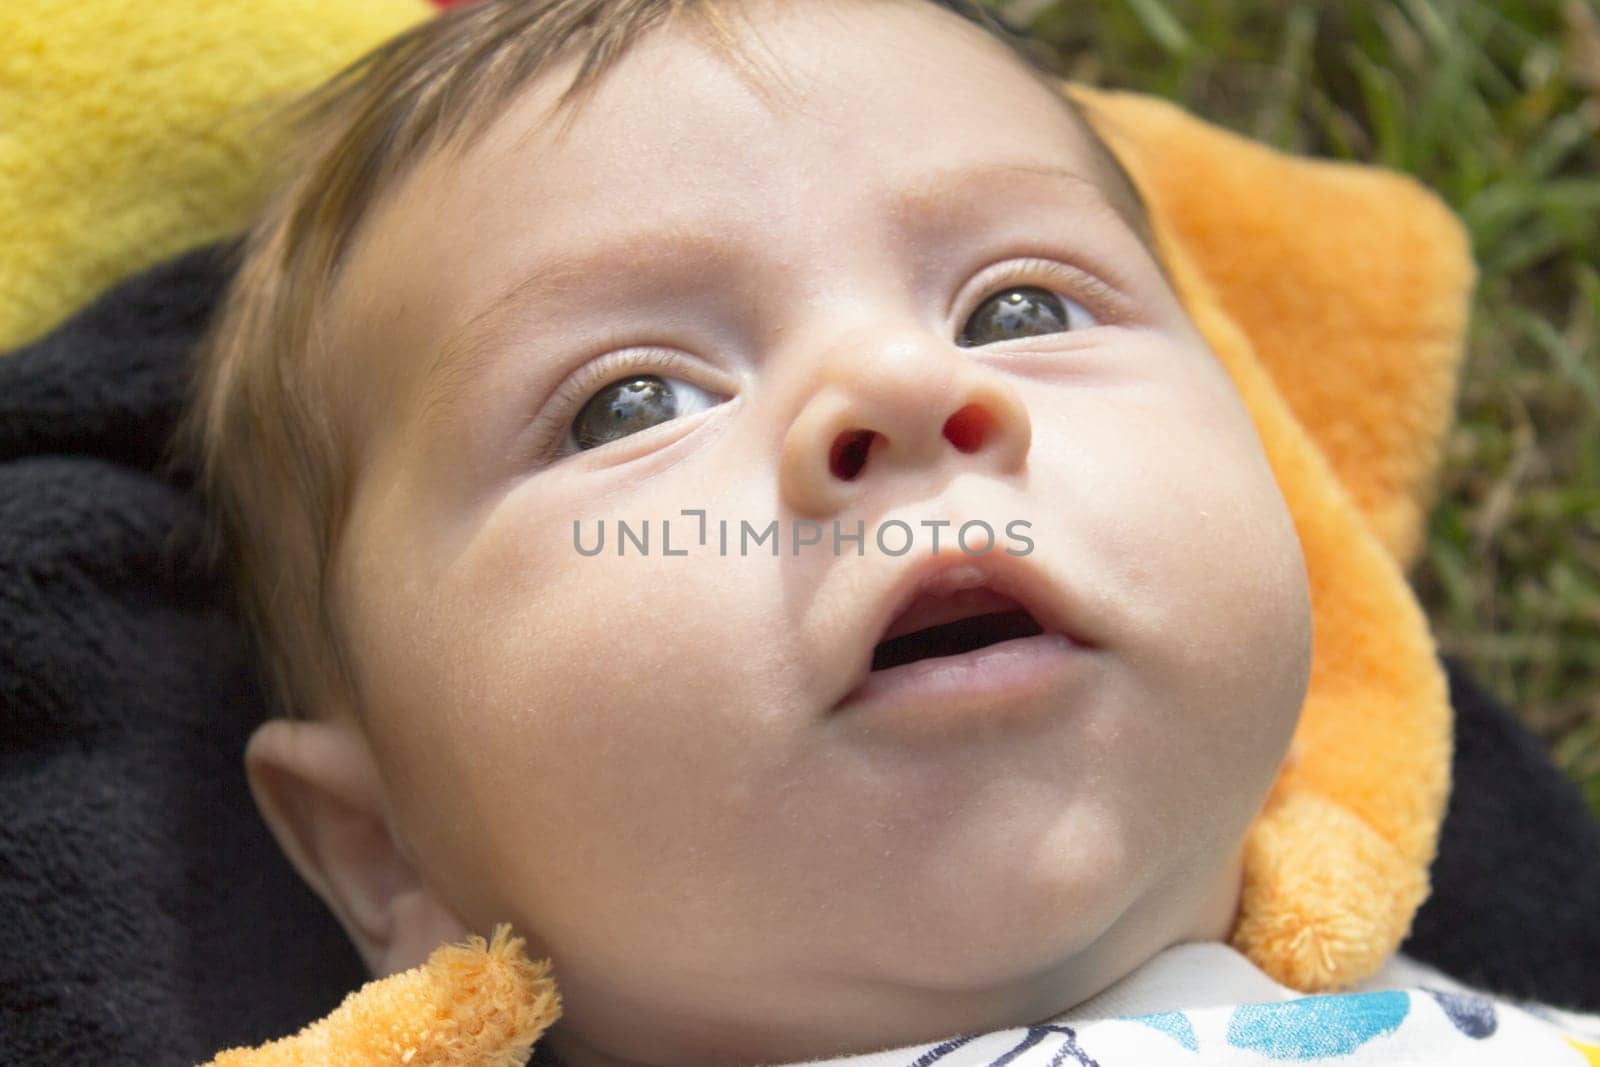 Two month old baby portrait. Happy expression